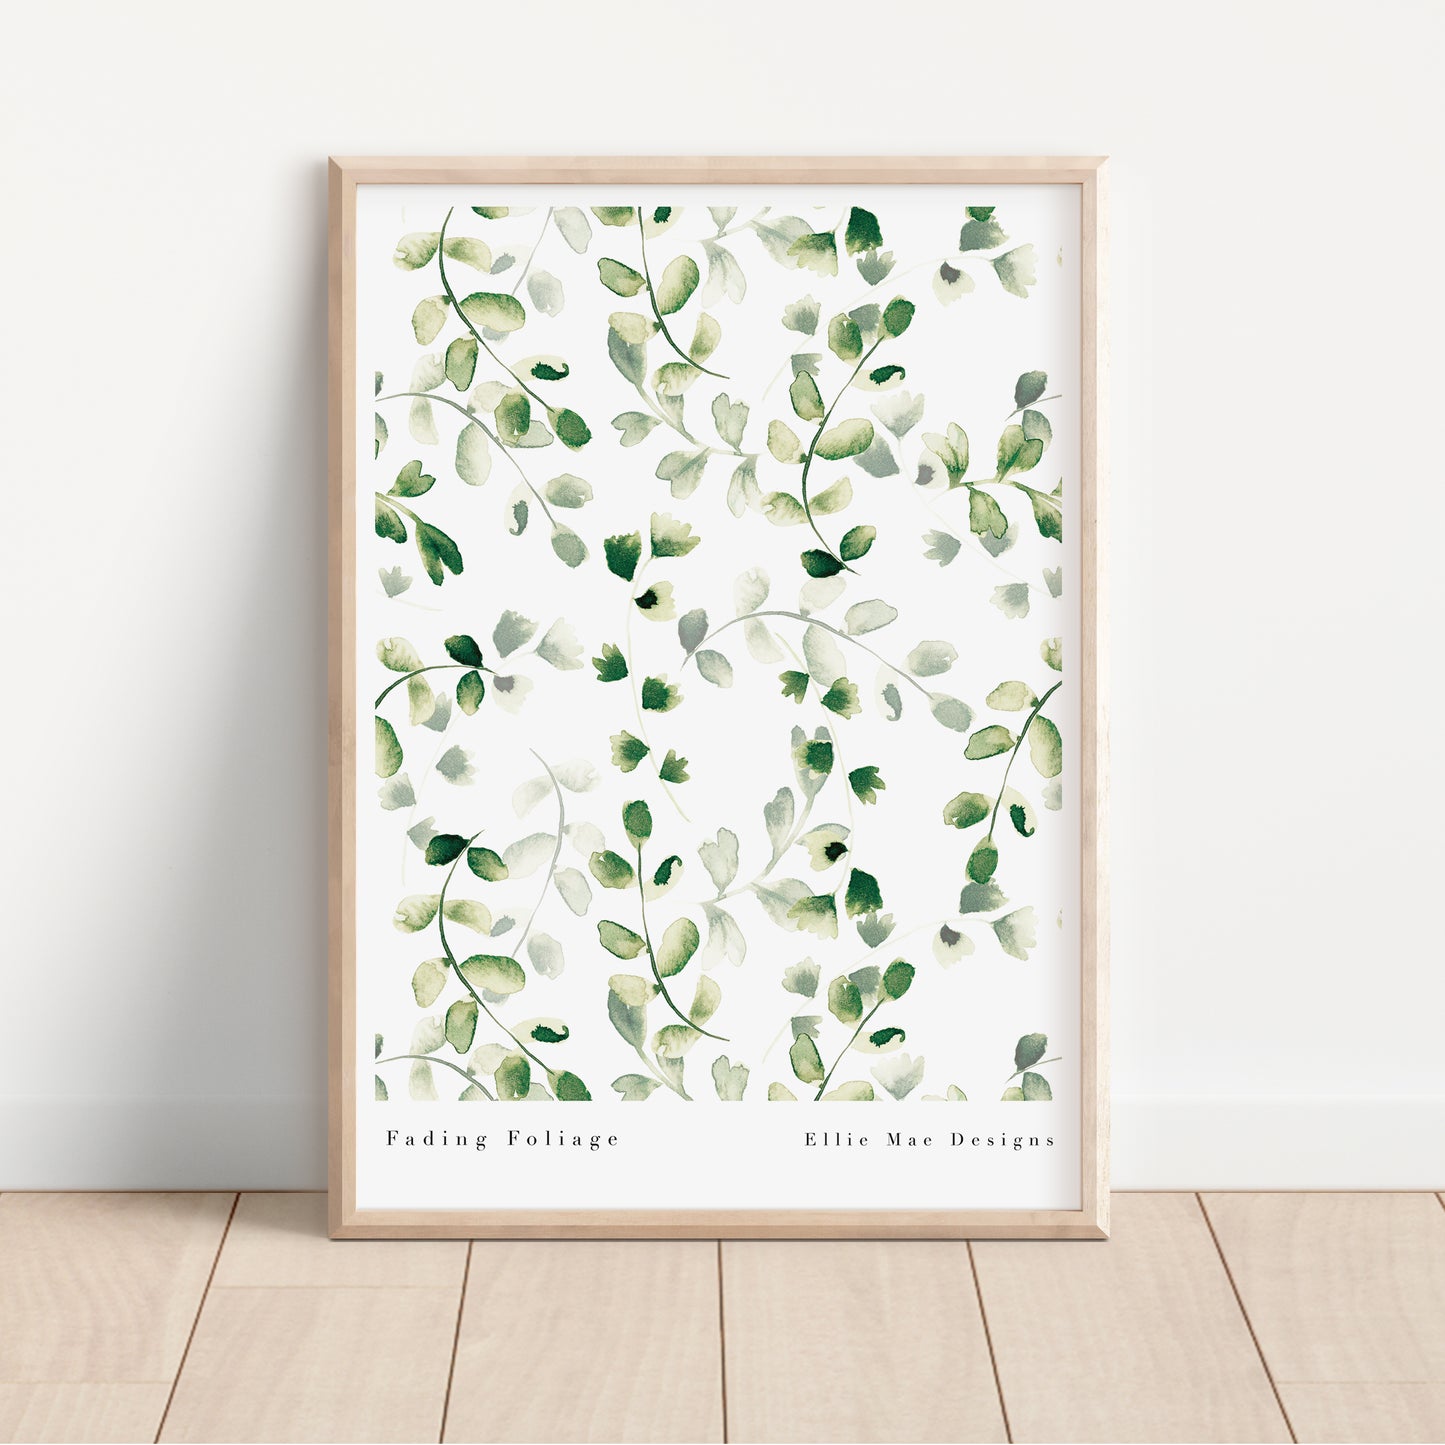 earthy fading foliage green wall art for adding calm to your walls.